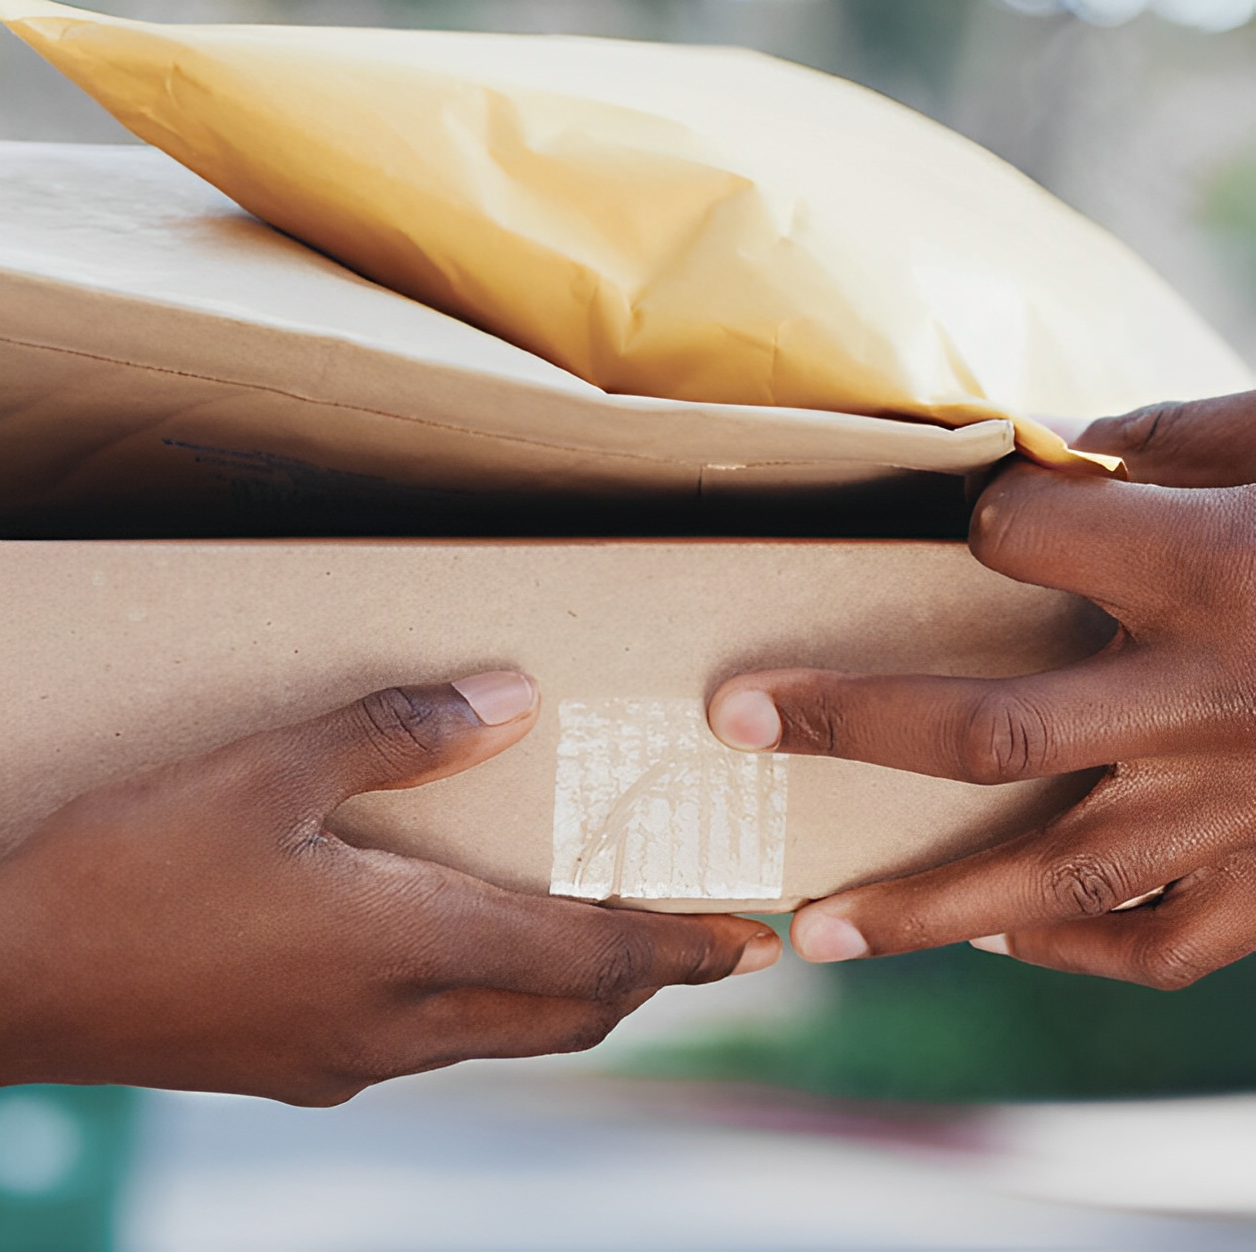 Image of packages being transferred by hand.